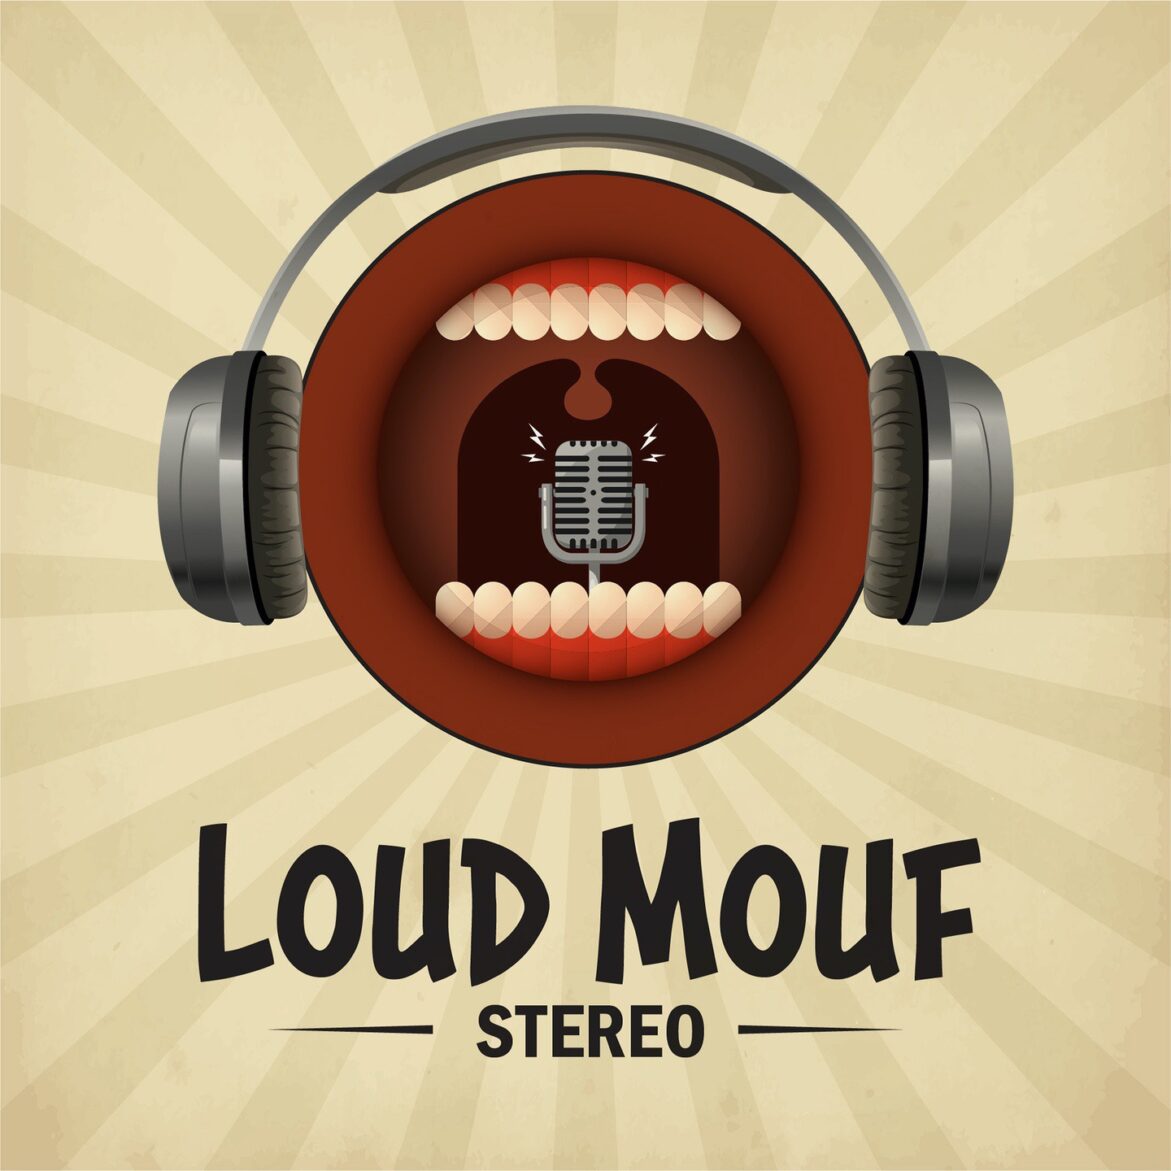 Black Podcasting - 275: Loud Mouf Stereo - Will & Wont Do With Ya Boo